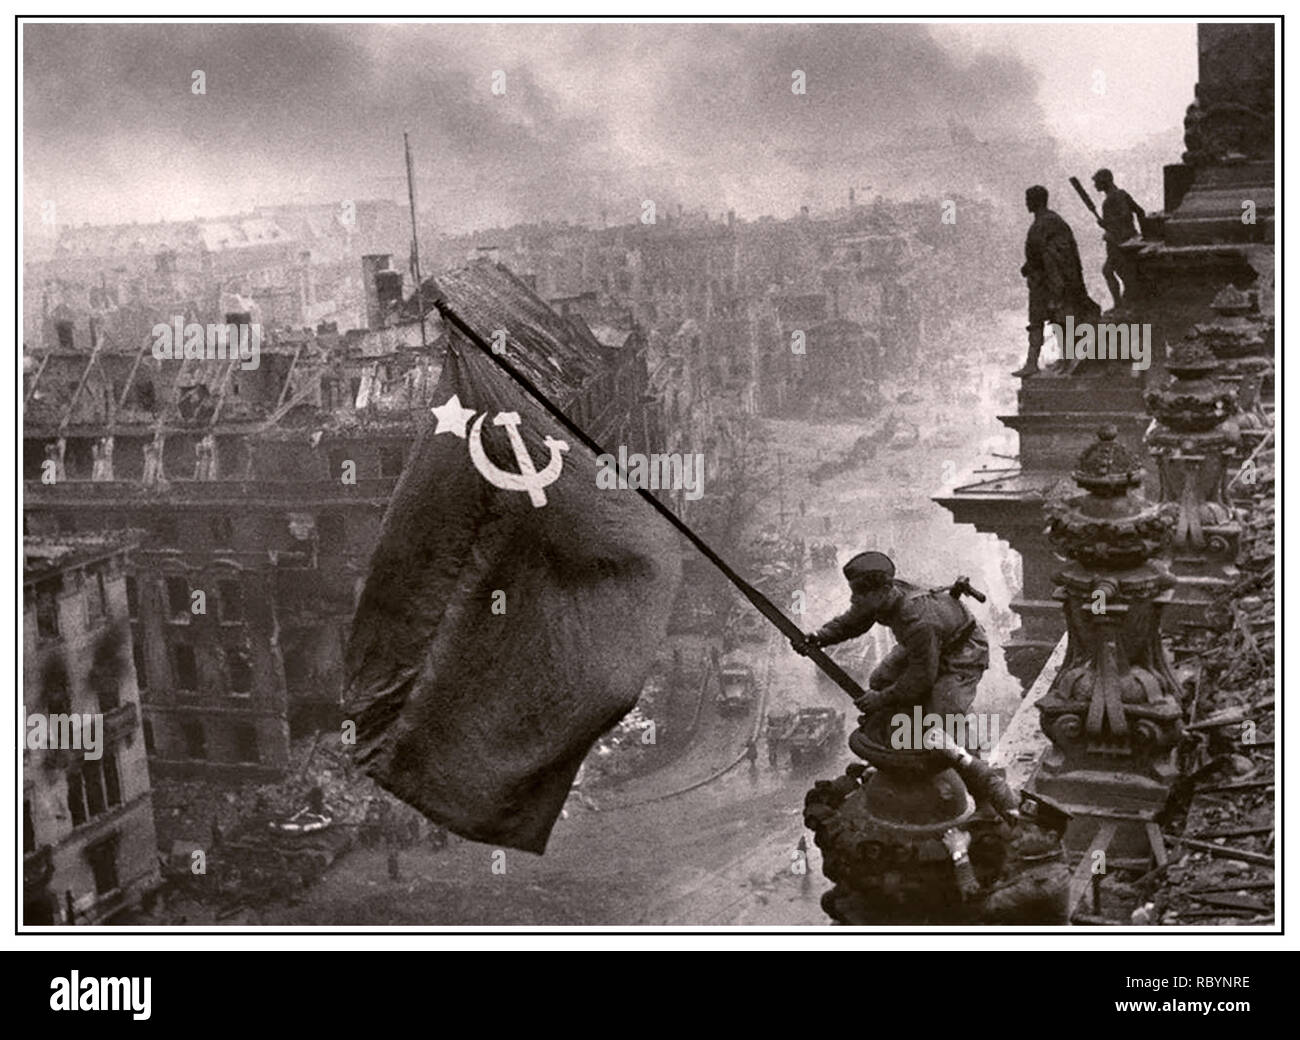 RUSSIAN ARMY SOVIET FLAG OVER NAZI BERLIN REICHSTAG World War II Germany. Iconic image of raising a Russian Soviet flag over the Reichstag, an historic World War II photograph, taken during the Battle of Berlin on 2 May 1945. It shows Meliton Kantaria and Mikhail Yegorov raising the Hammer and Sickle flag over the Berlin Reichstag with Berlin in ruins behind. Germany WW2 Red Army Soviet Soldiers Hammer and Sickle Soviet flag Nazi Headquarters Reichstag, Berlin Germany 1945 Stock Photo